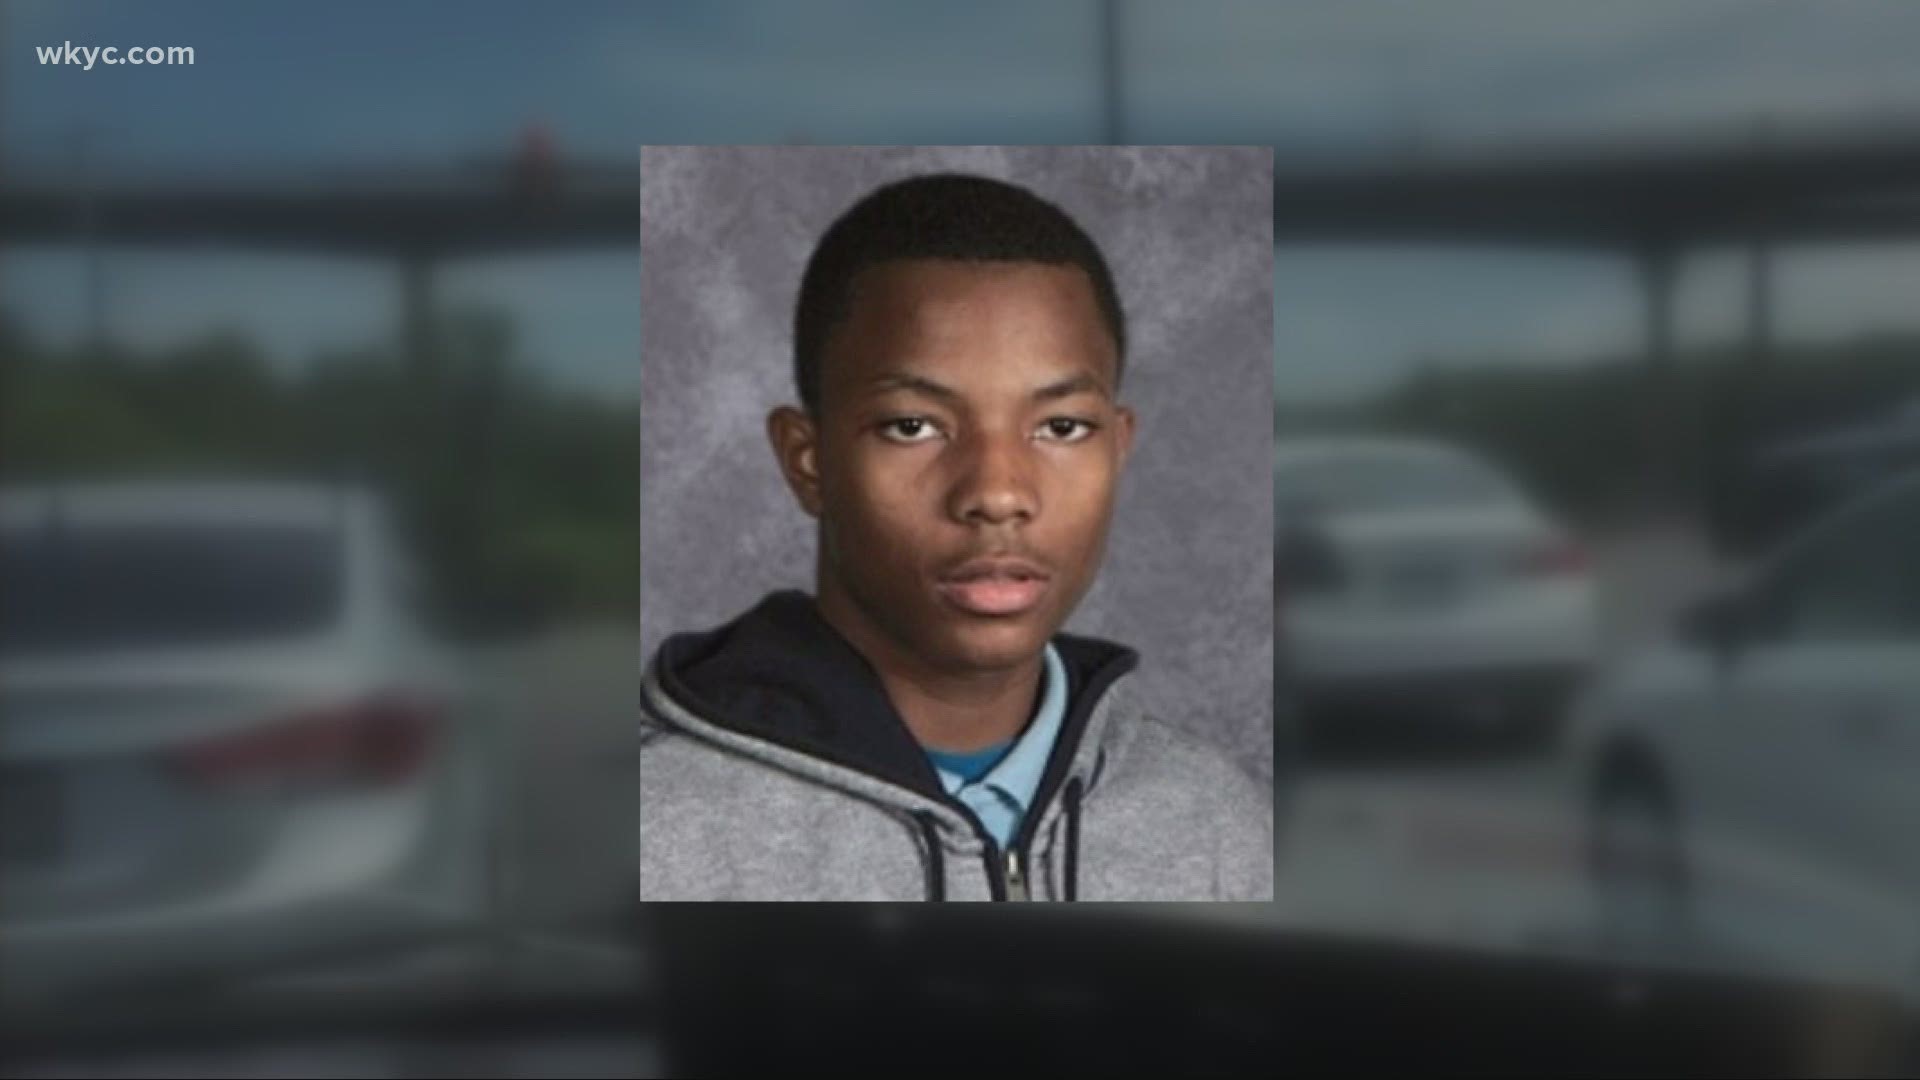 The 18-year-old was shot and killed over the weekend. Andrew Horansky has the latest.